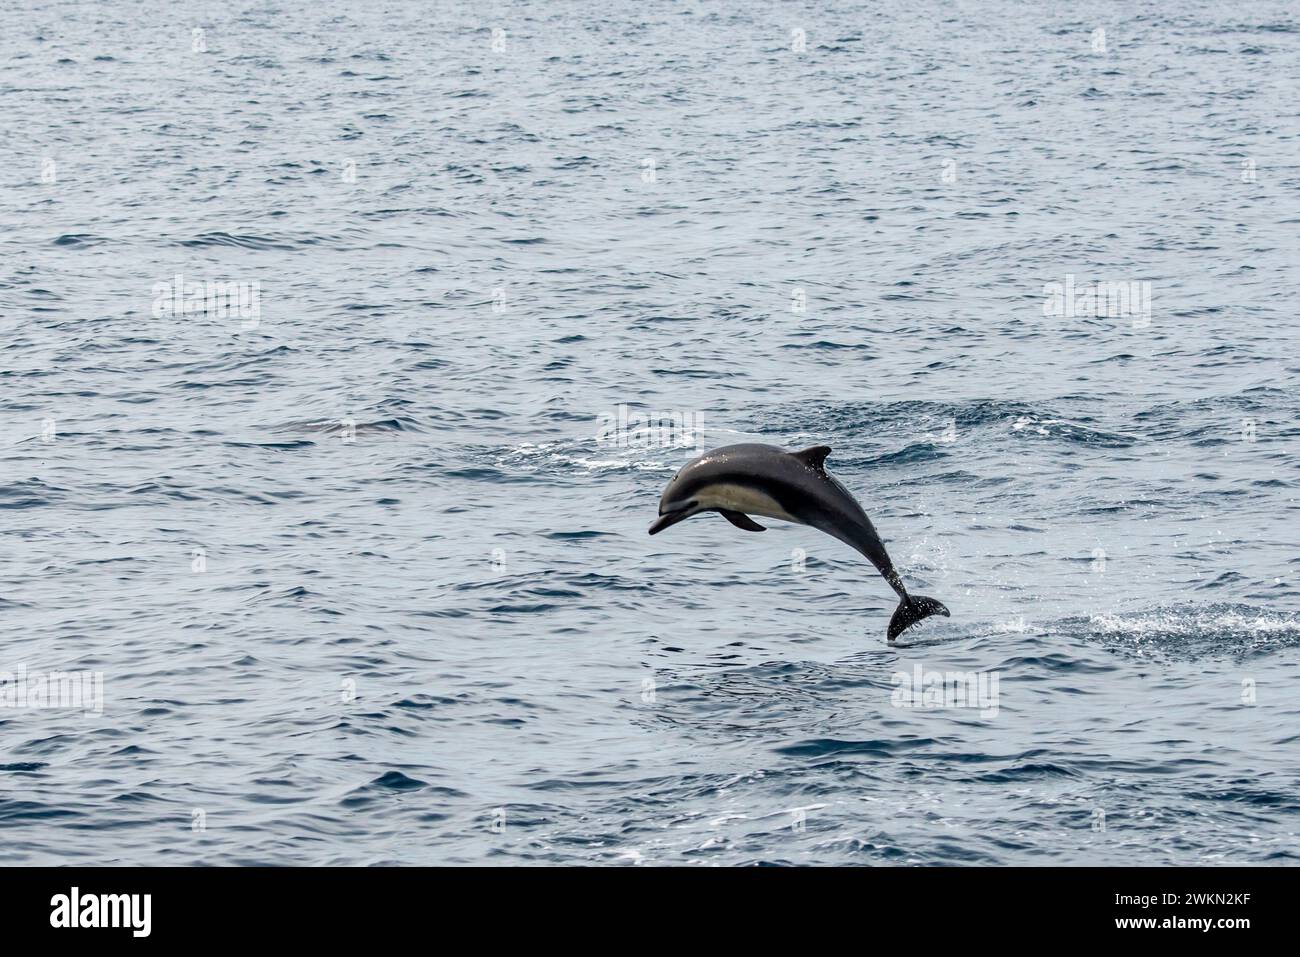 Dana Point, California. Short-beaked common dolphin,  Delphinus delphis jumping out of the water in the Pacific ocean Stock Photo